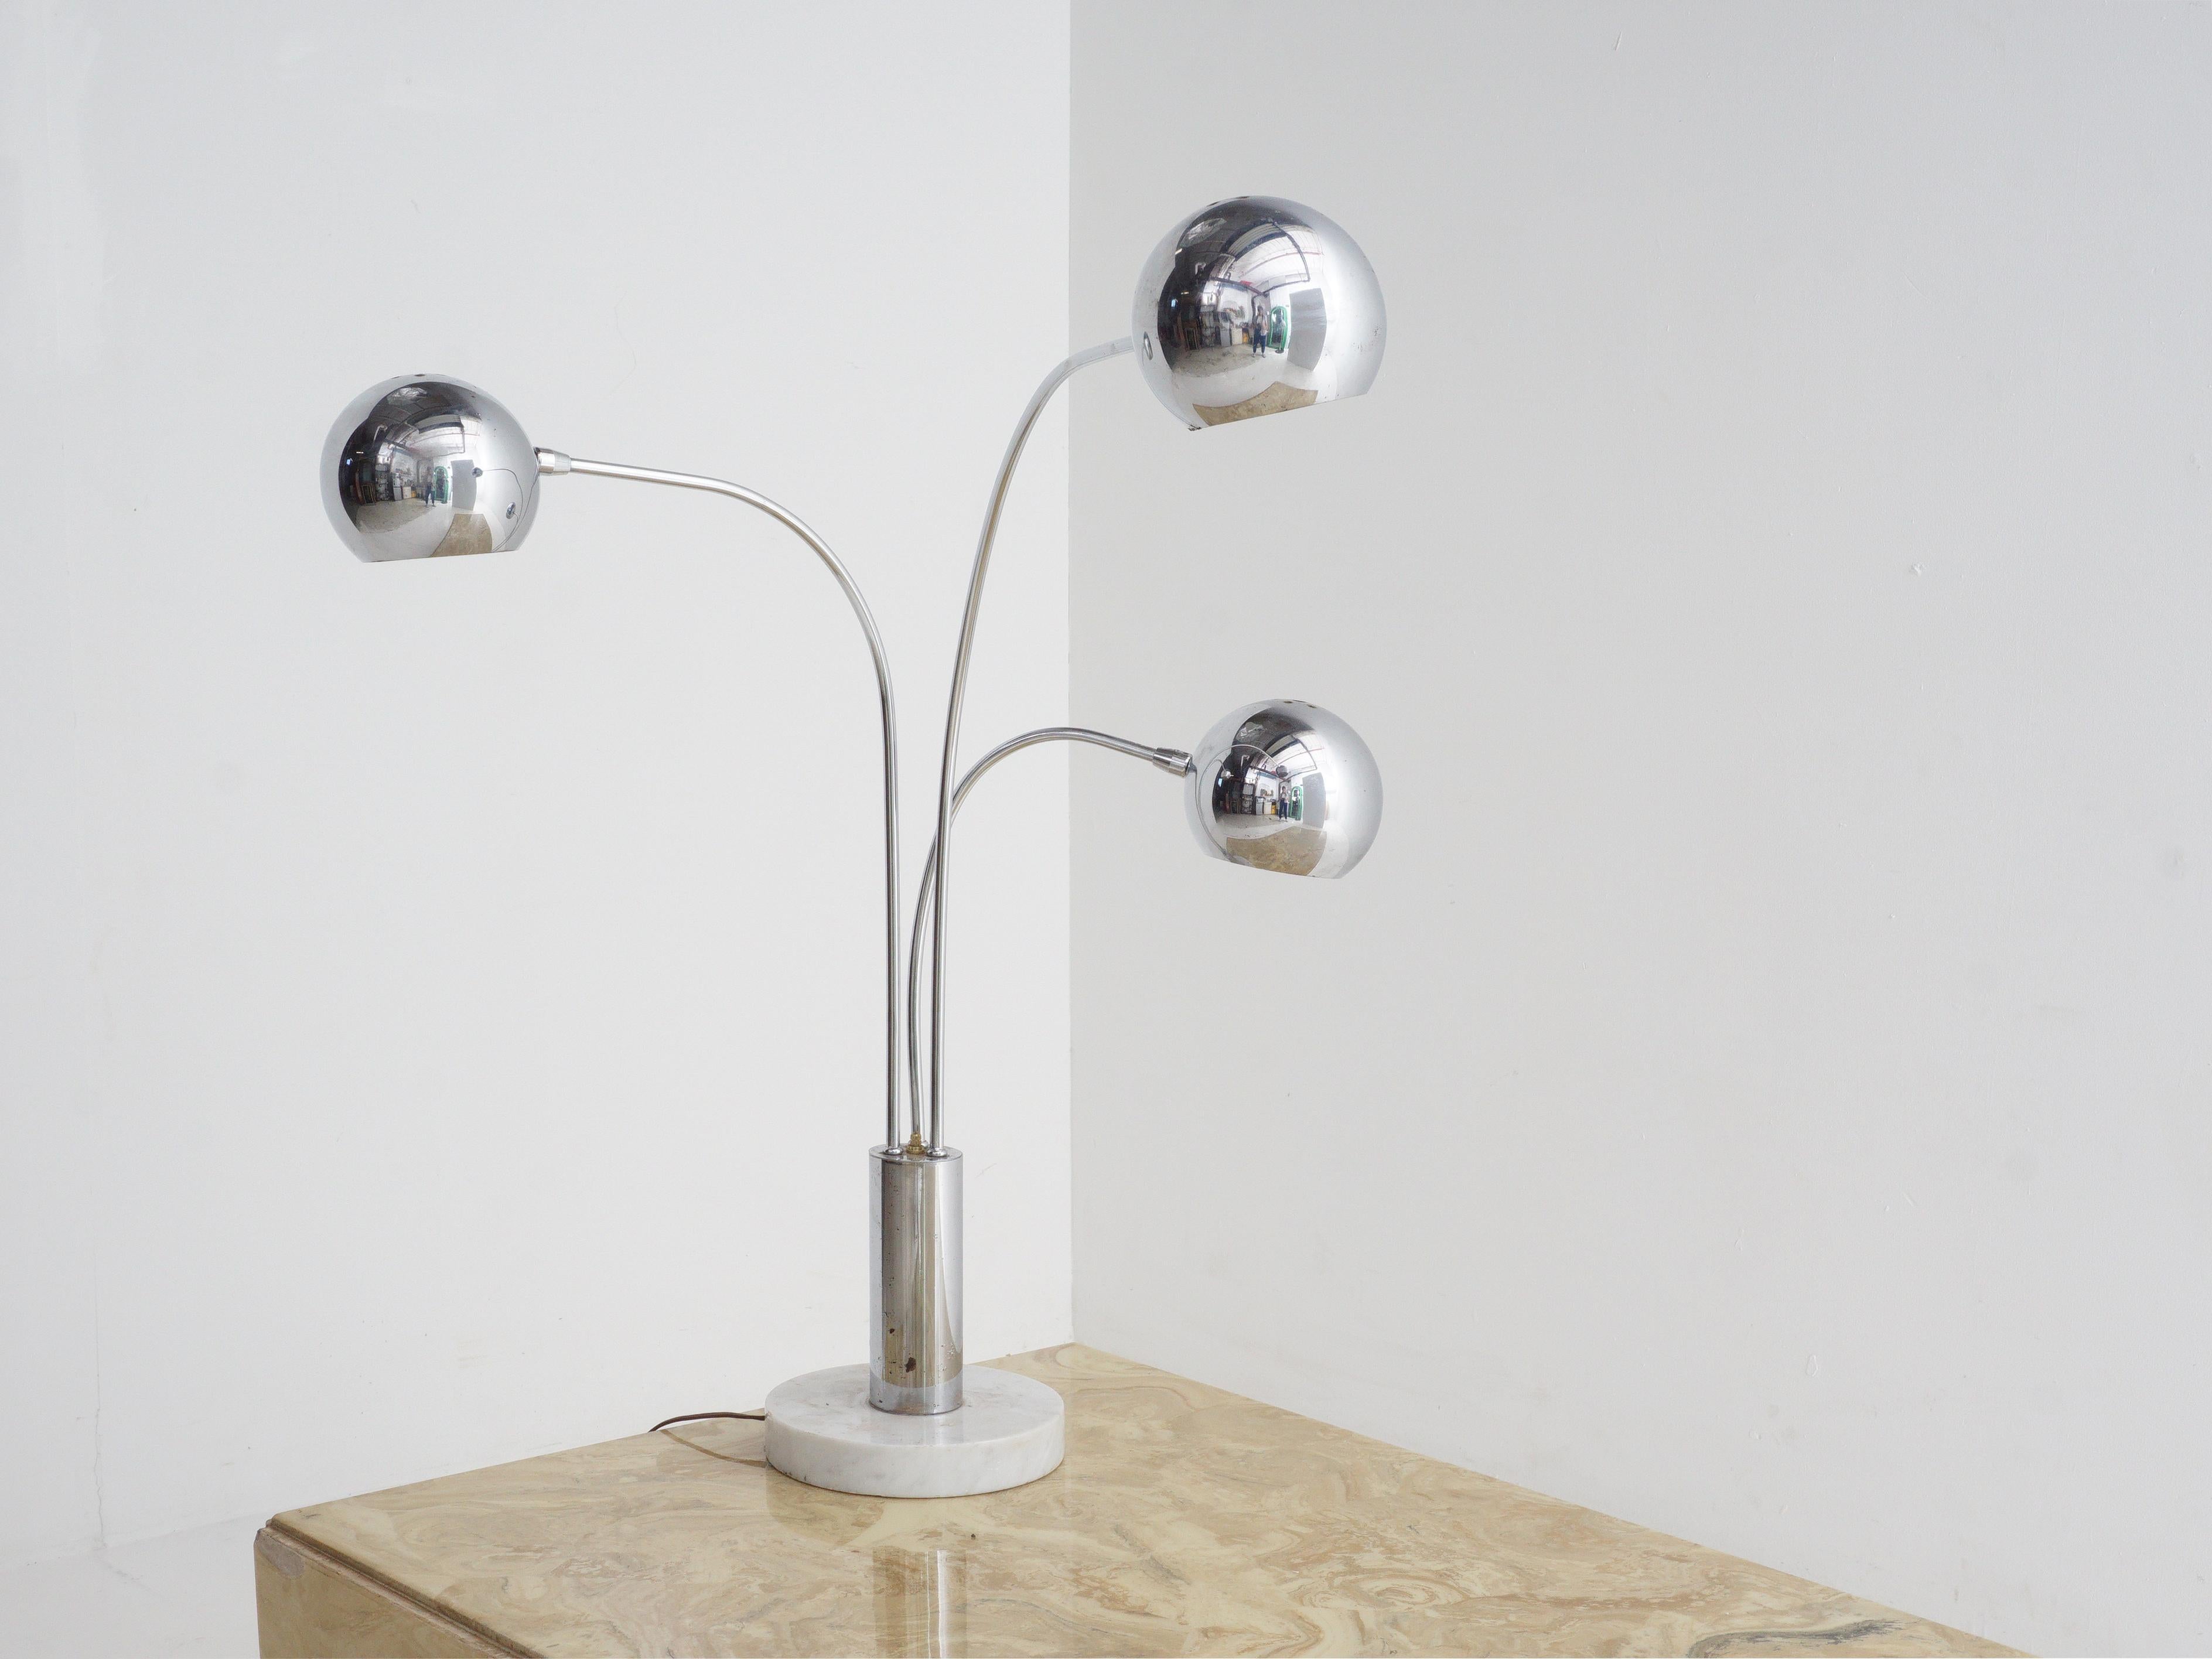 Step into the '70s with this chrome orb and marble table lamp that's here to make a statement. It's like a mini disco ball paired with a sleek marble base, giving your room an instant dose of vintage cool.

- 32